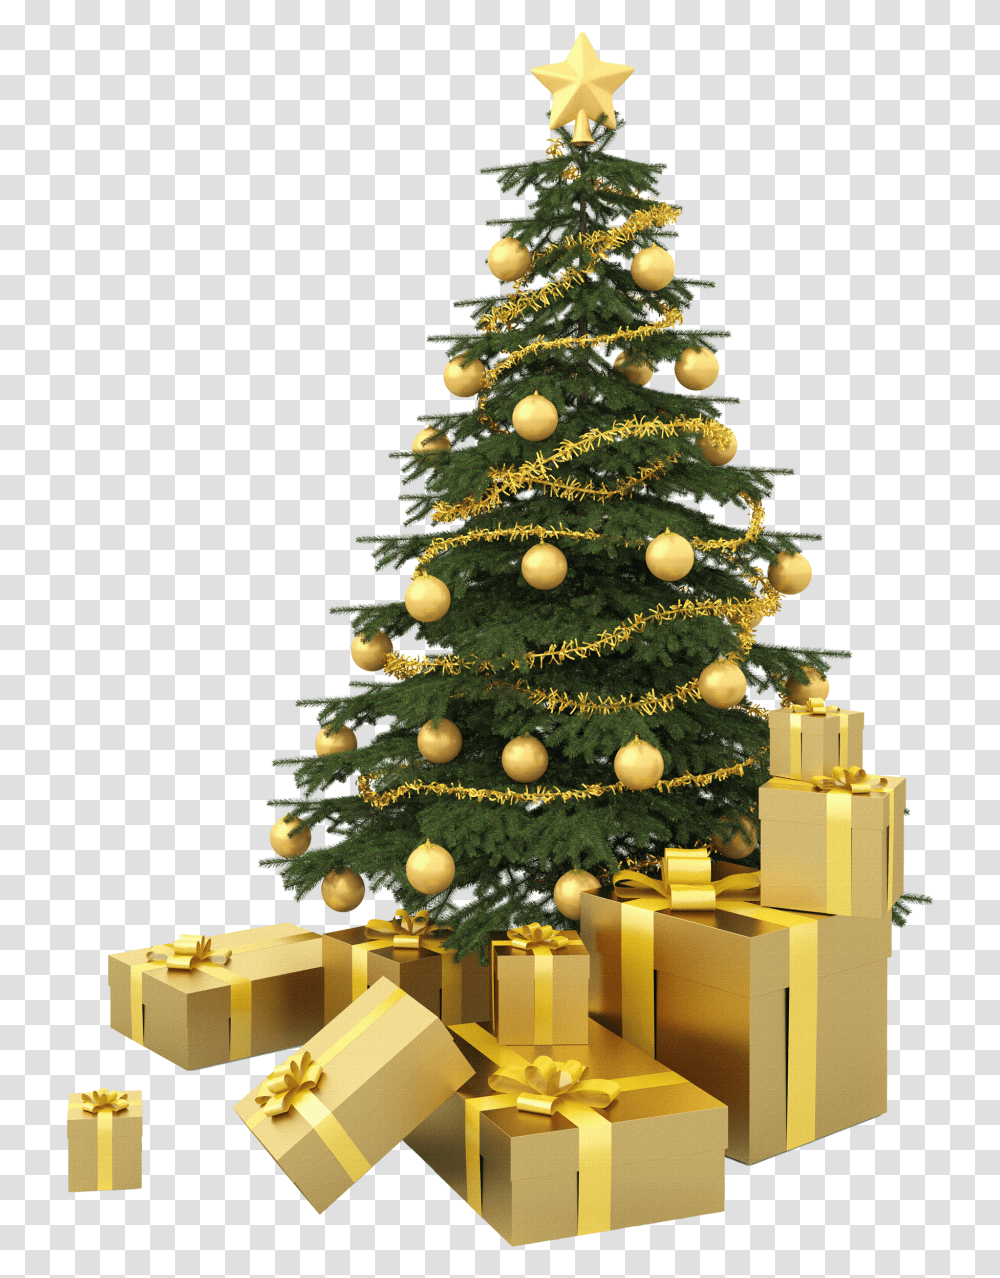 Download Christmas Tree With Presents Image For Free New Year Tree, Plant, Ornament Transparent Png